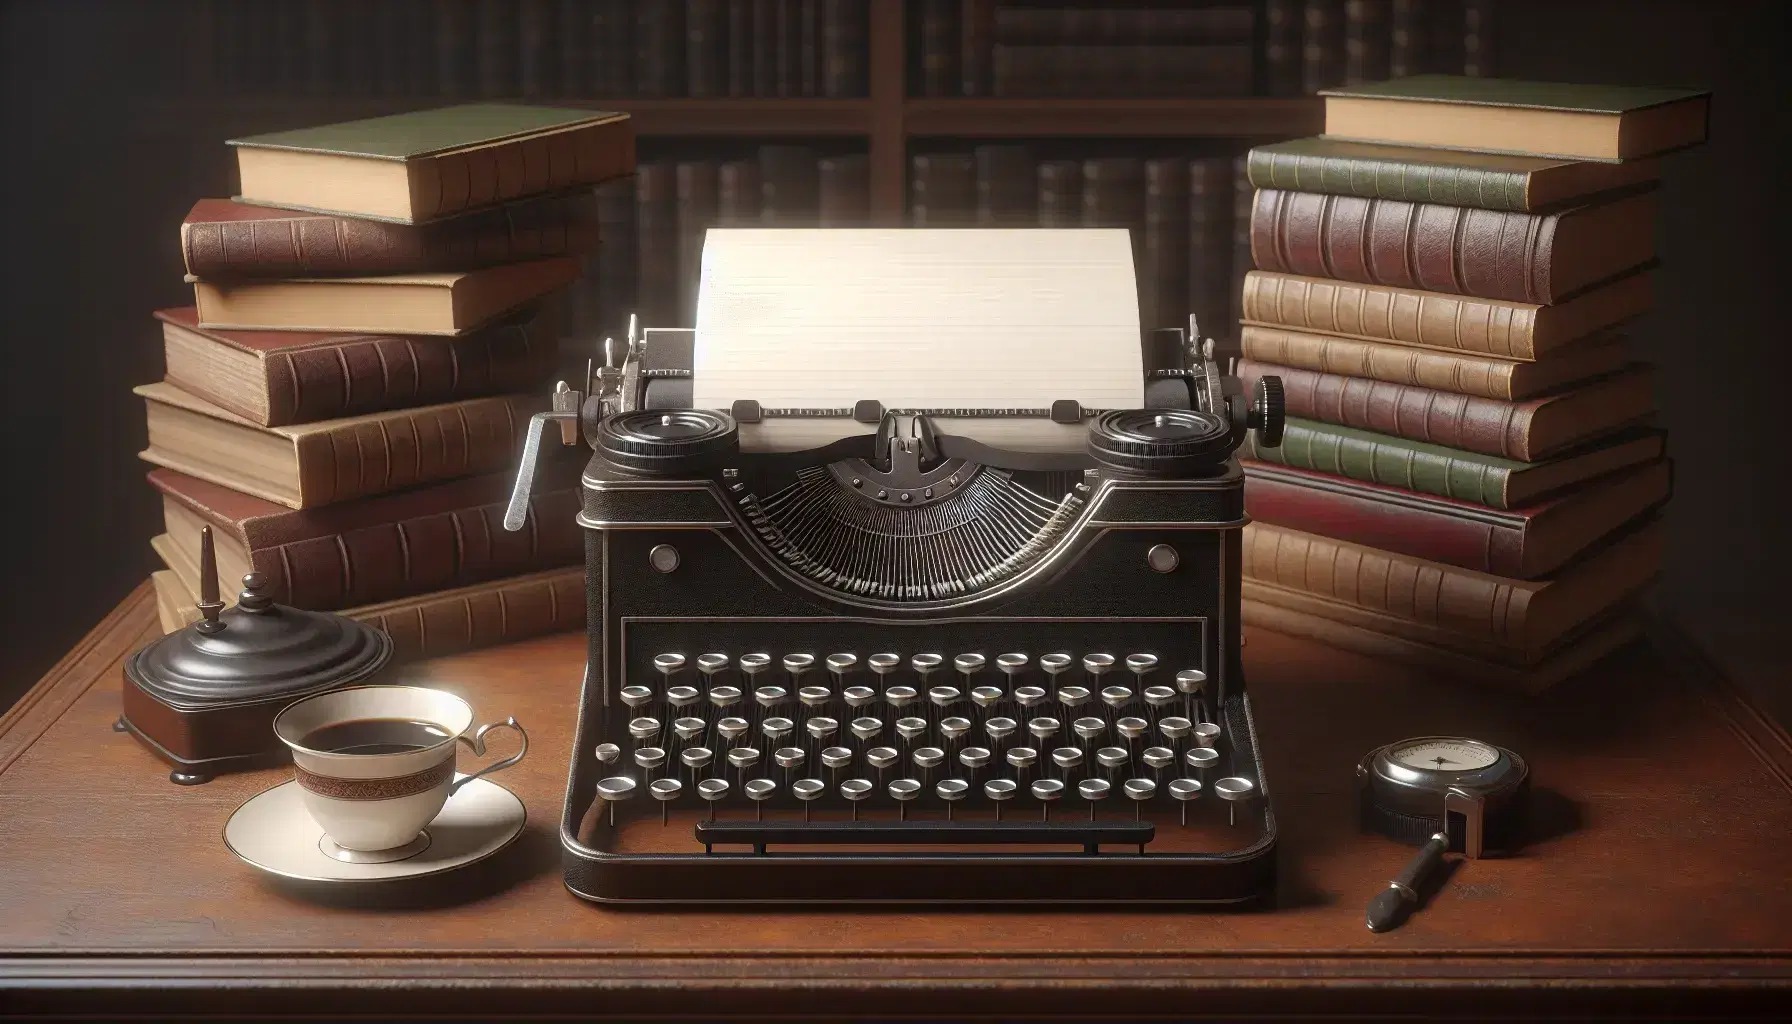 Vintage typewriter with blank paper on a wooden desk, accompanied by a stack of books, a coffee cup, pencils, and an open notebook in a softly lit setting.